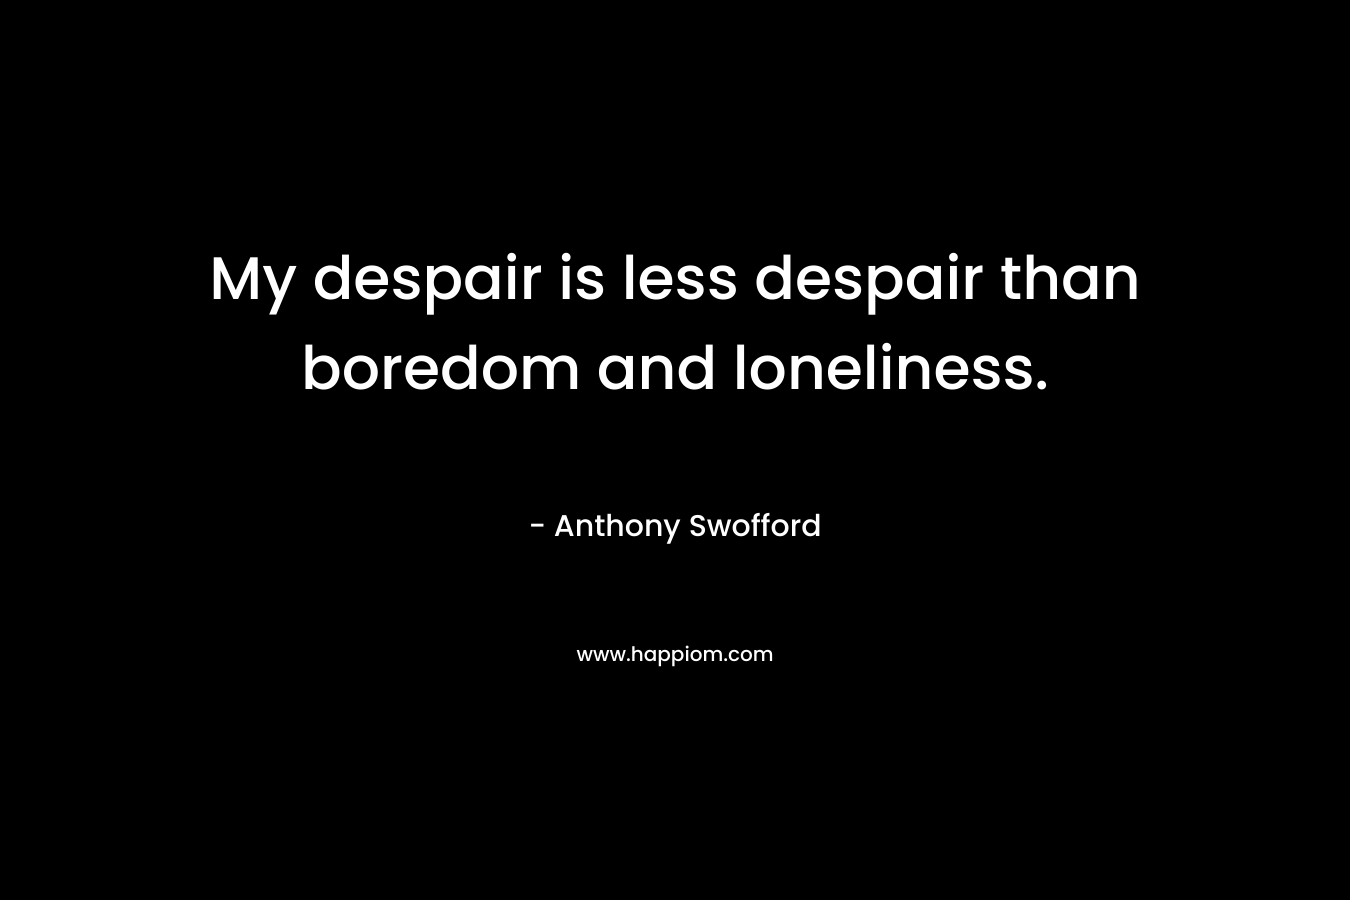 My despair is less despair than boredom and loneliness.